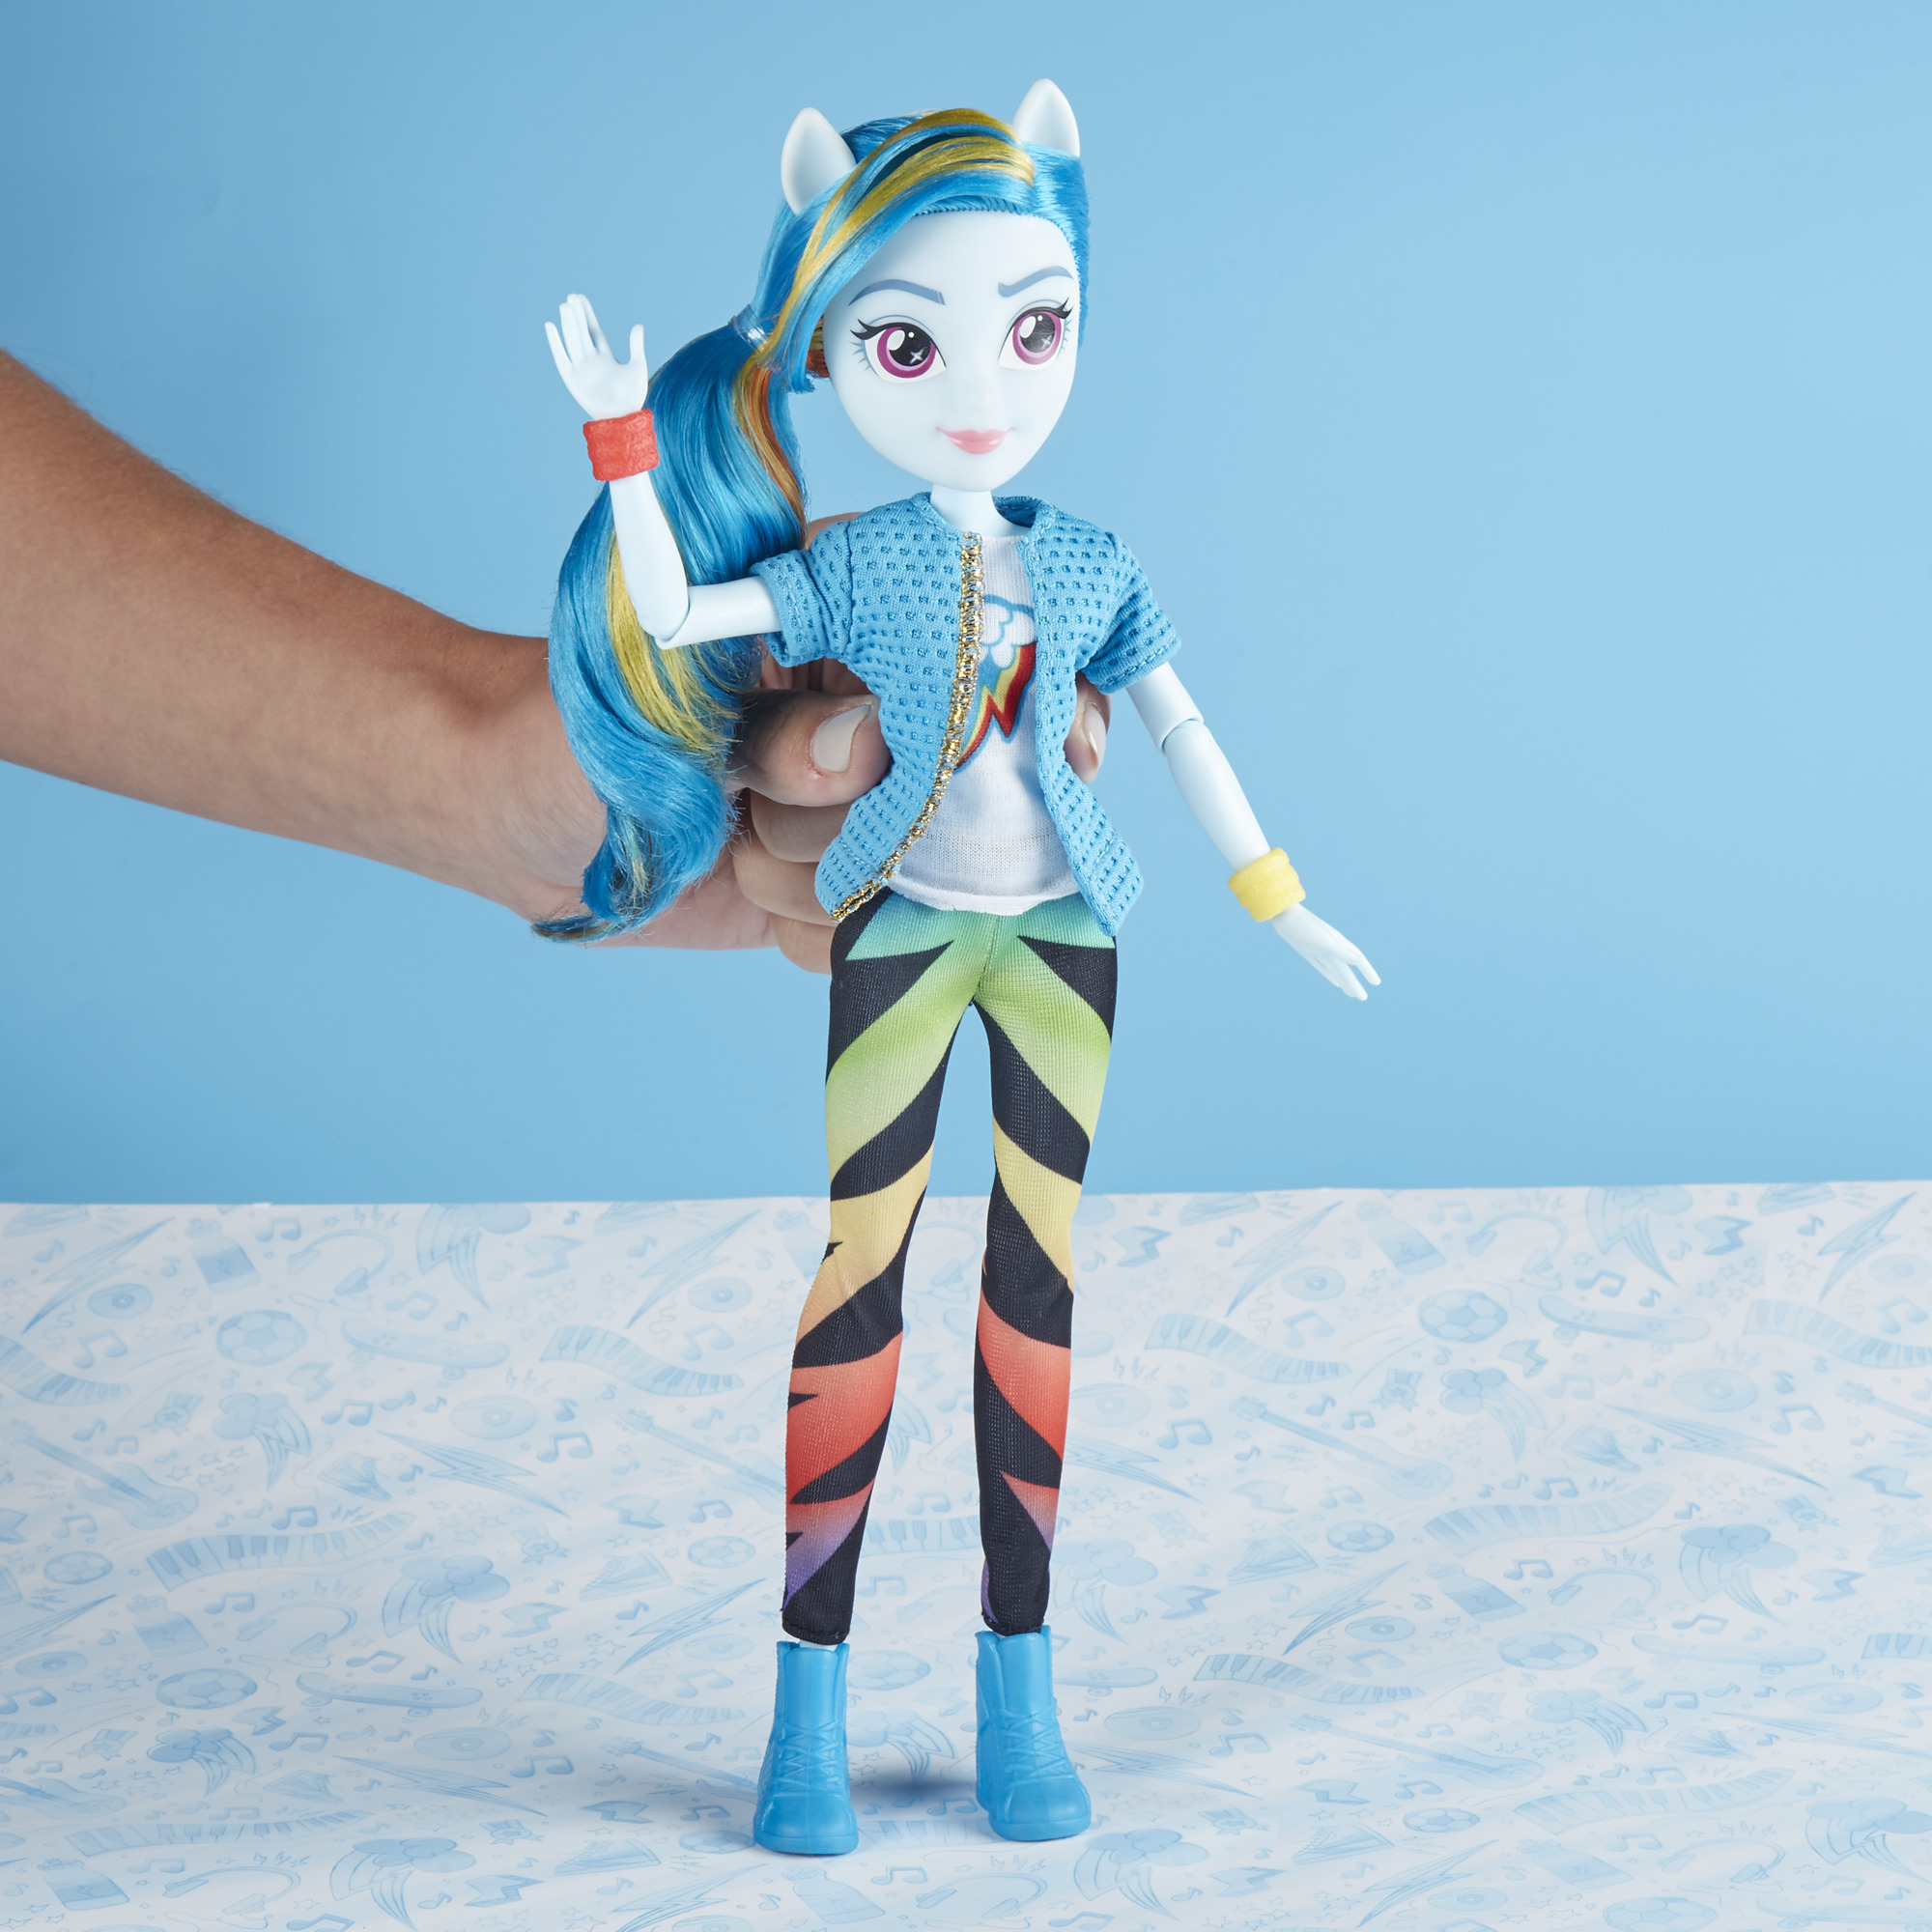 My Little Pony Equestria Girls Rainbow Dash Classic Style Doll - image 3 of 11